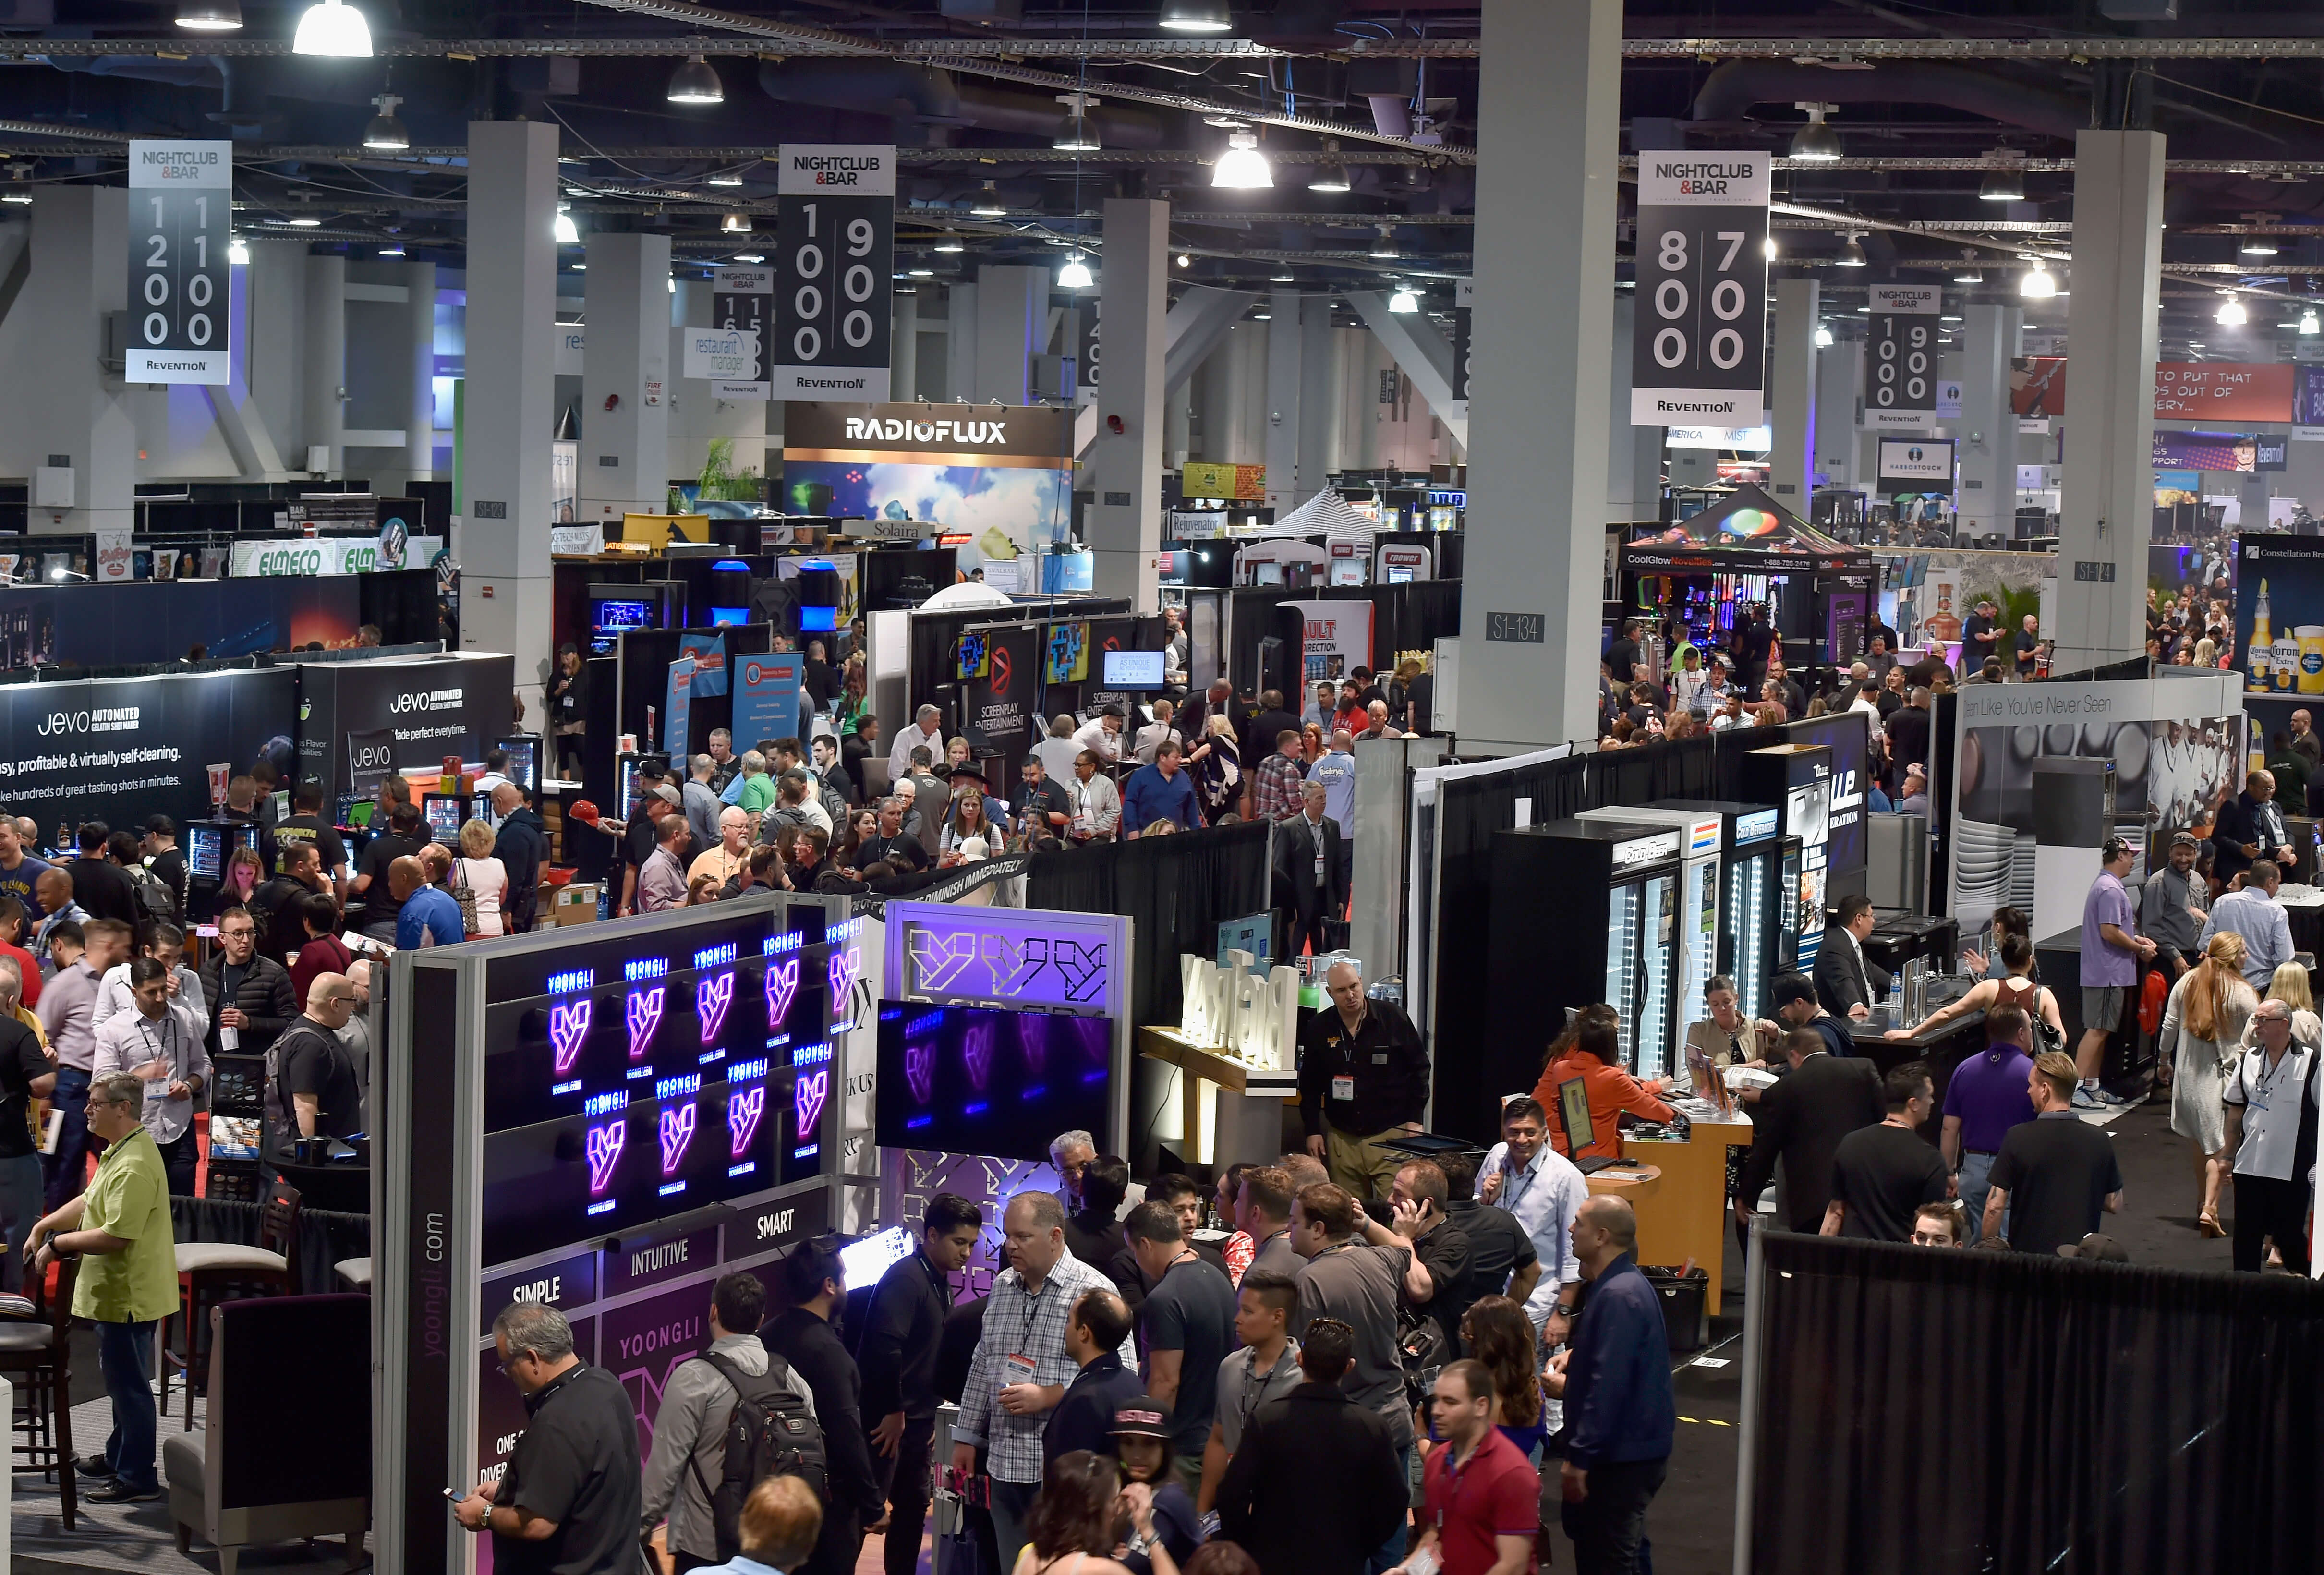 Nightclub And Bar Show 2020 Sponsors | Participants checking out exhibitor booths at the expo hall | Nightclub And Bar Show 2020